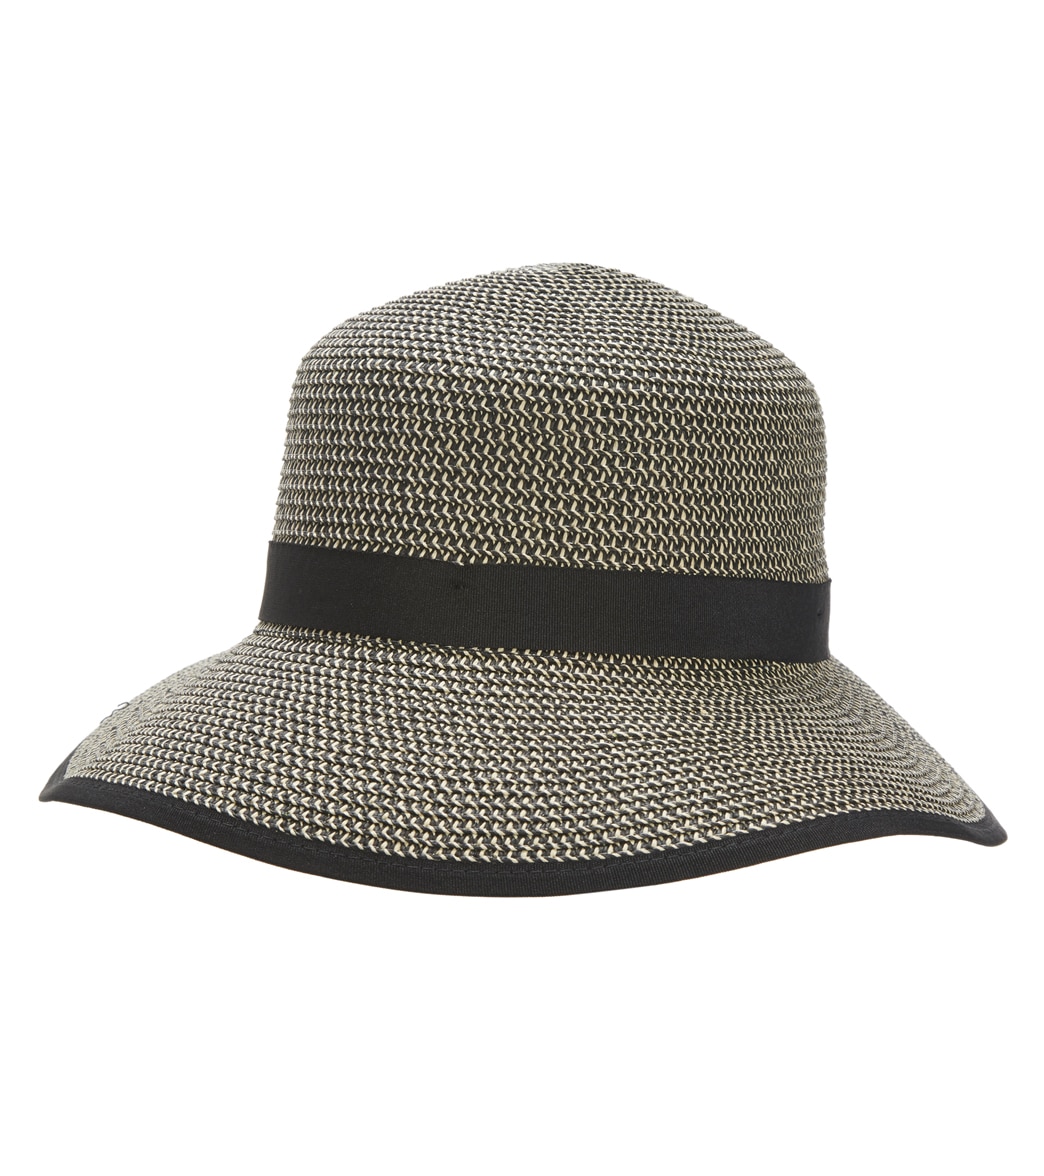 Physician Endorsed Women's Pitch Perfect Contrast Straw Hat - Black Tweed One Size - Swimoutlet.com